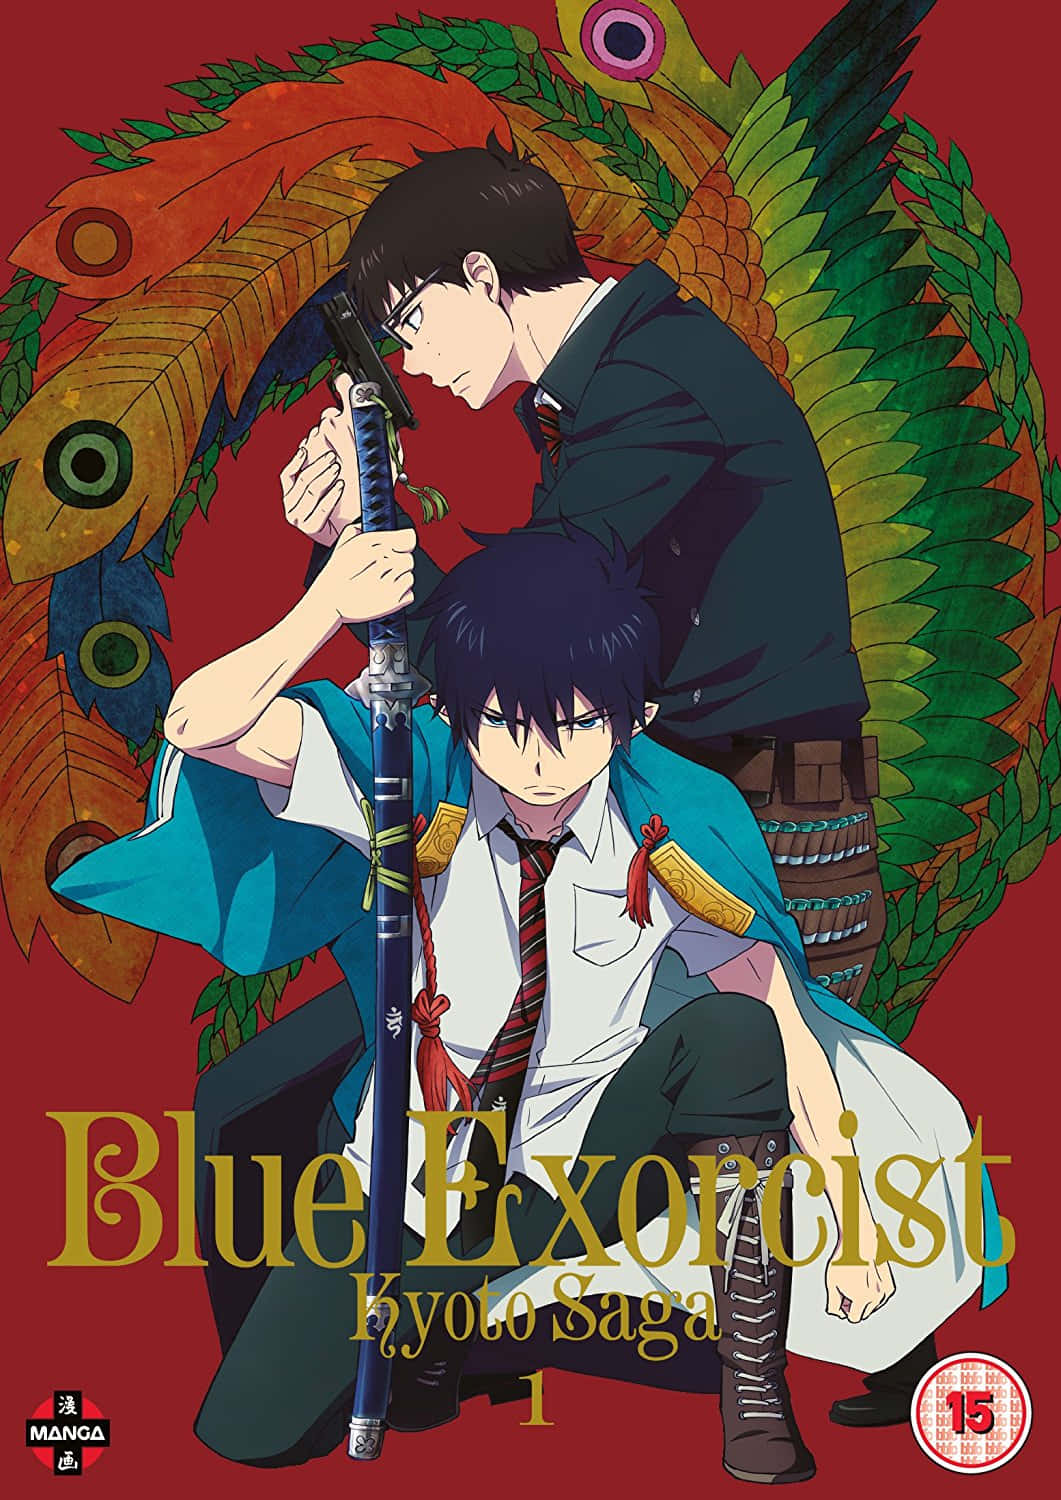 Join Rin and the Other Exorcists with Blue Exorcist